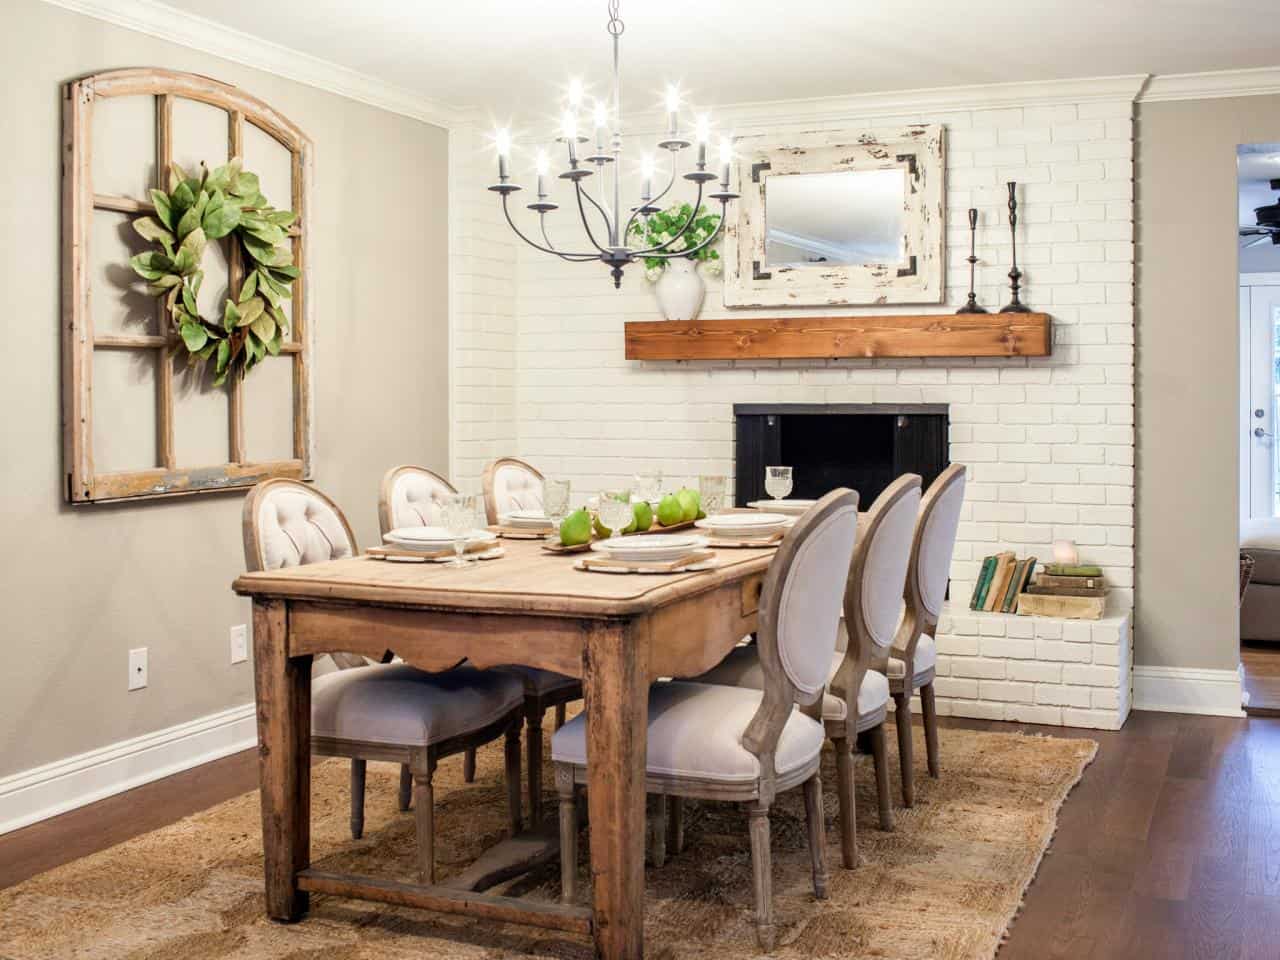 entrancing dining room vintage styling design ideas showcasing awesome fireplace complete marvelous rustic dining table also comfortable neutral dining chair decoration best leather conditioner for ch